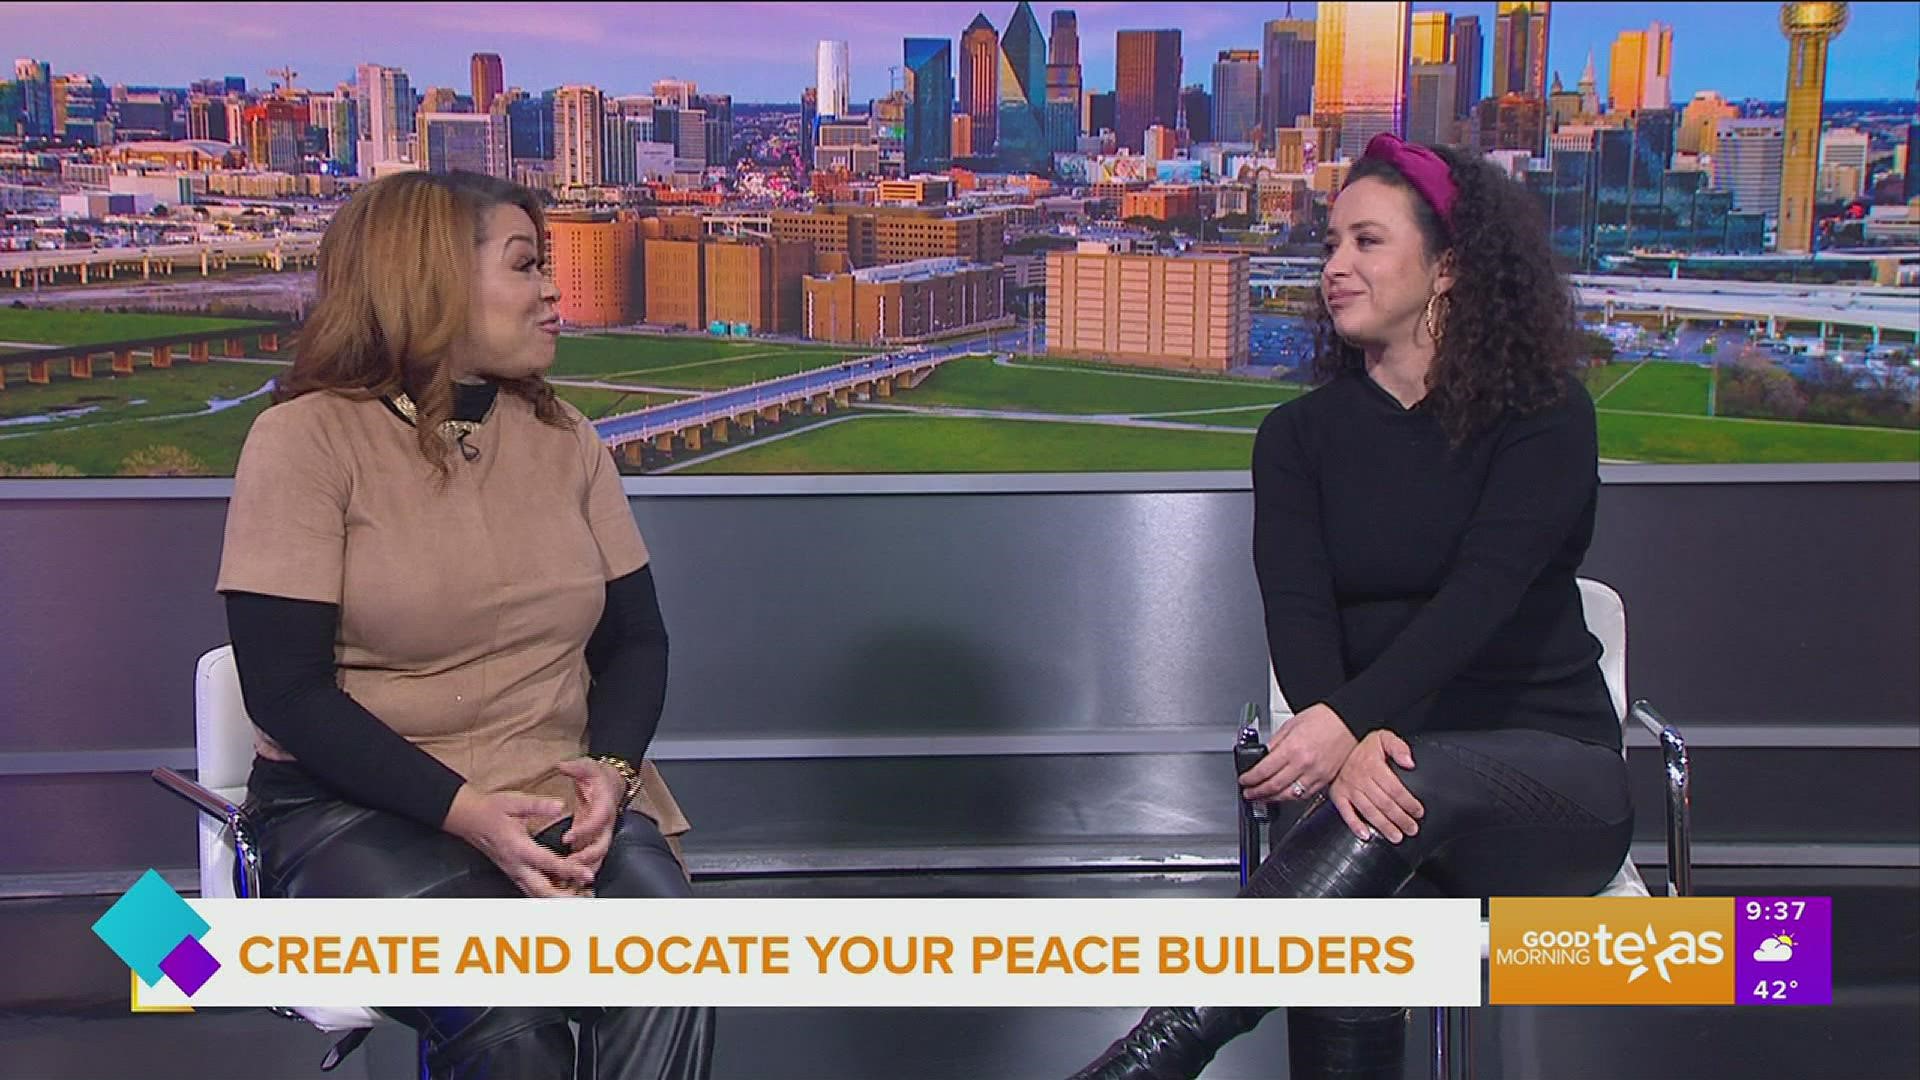 L. Michelle Smith joins us to talk about a concept called "Peace Builders”, and how this idea can propel us forward no matter what.